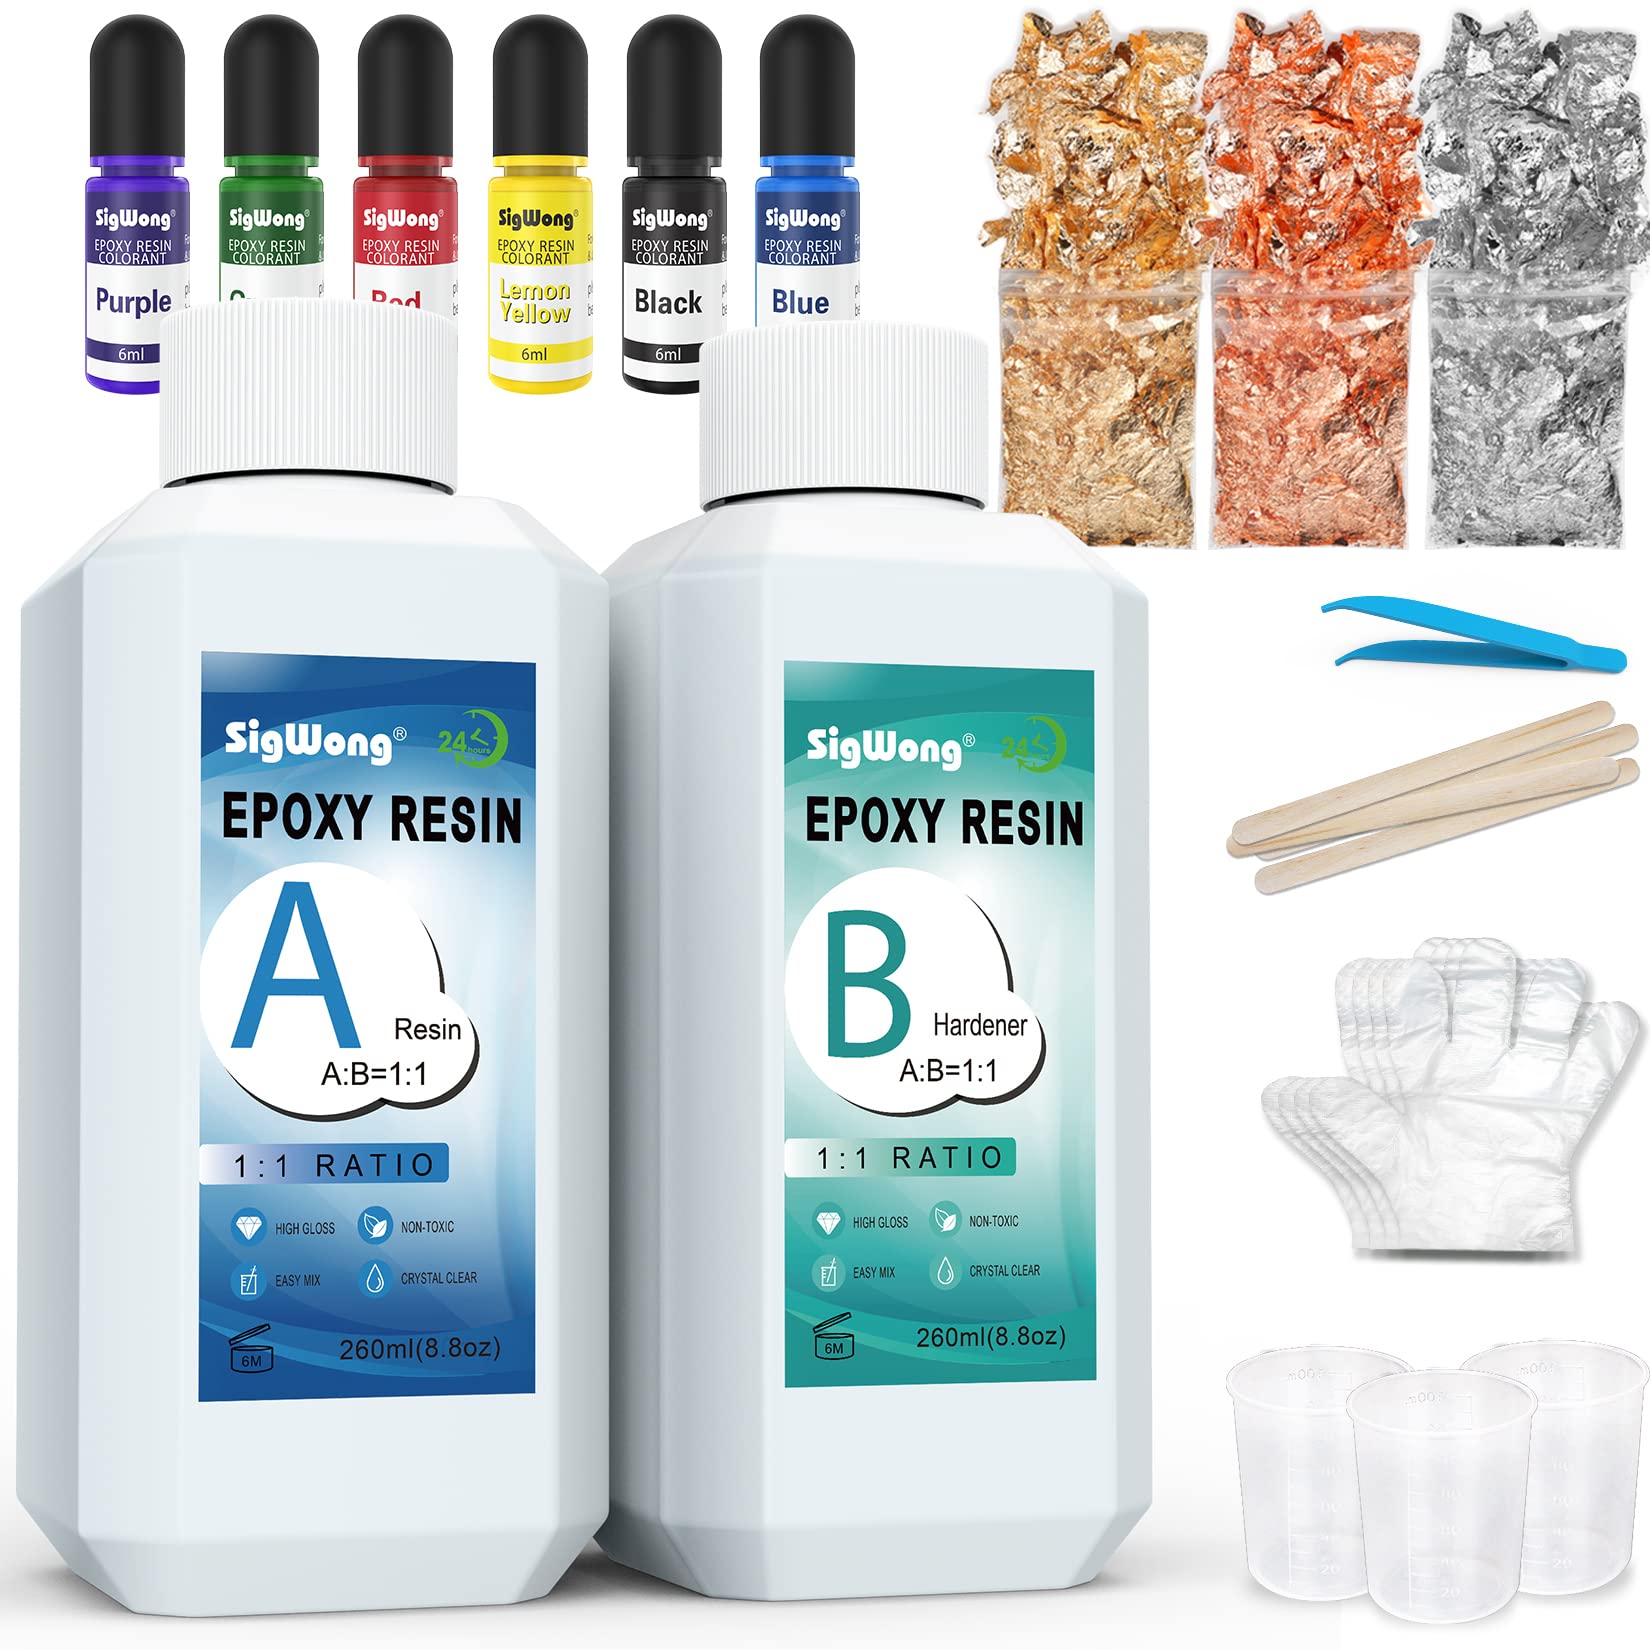 Epoxy Resin Clear Crystal Coating Kit 17.6oz - 2 Part Casting Resin for Art  Craft Jewelry Making River Tables Bonus Gloves Measuring Cup Wooden Sticks  Gold Foil Flakes and Tweezers 17.6oz Epoxy